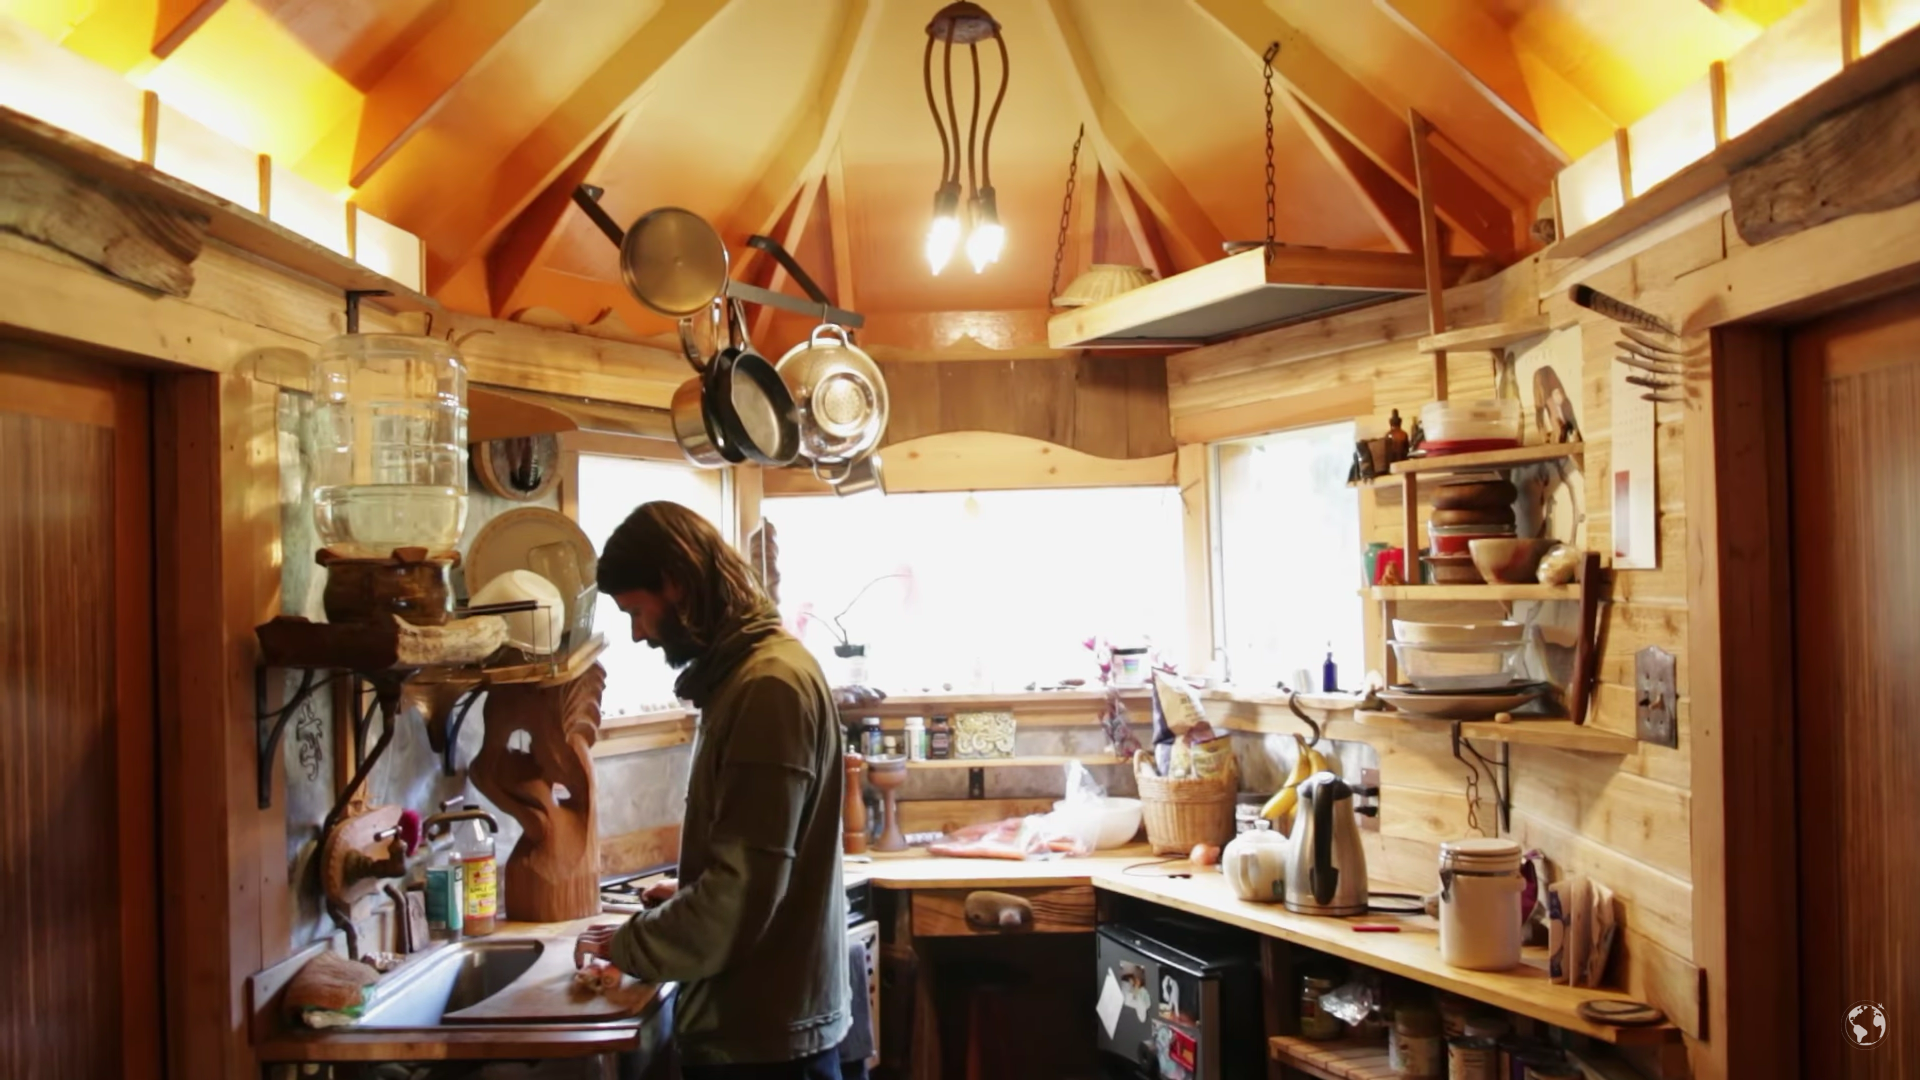 Artisan Builds His Tiny House from Salvaged Trailer – with No Plans!